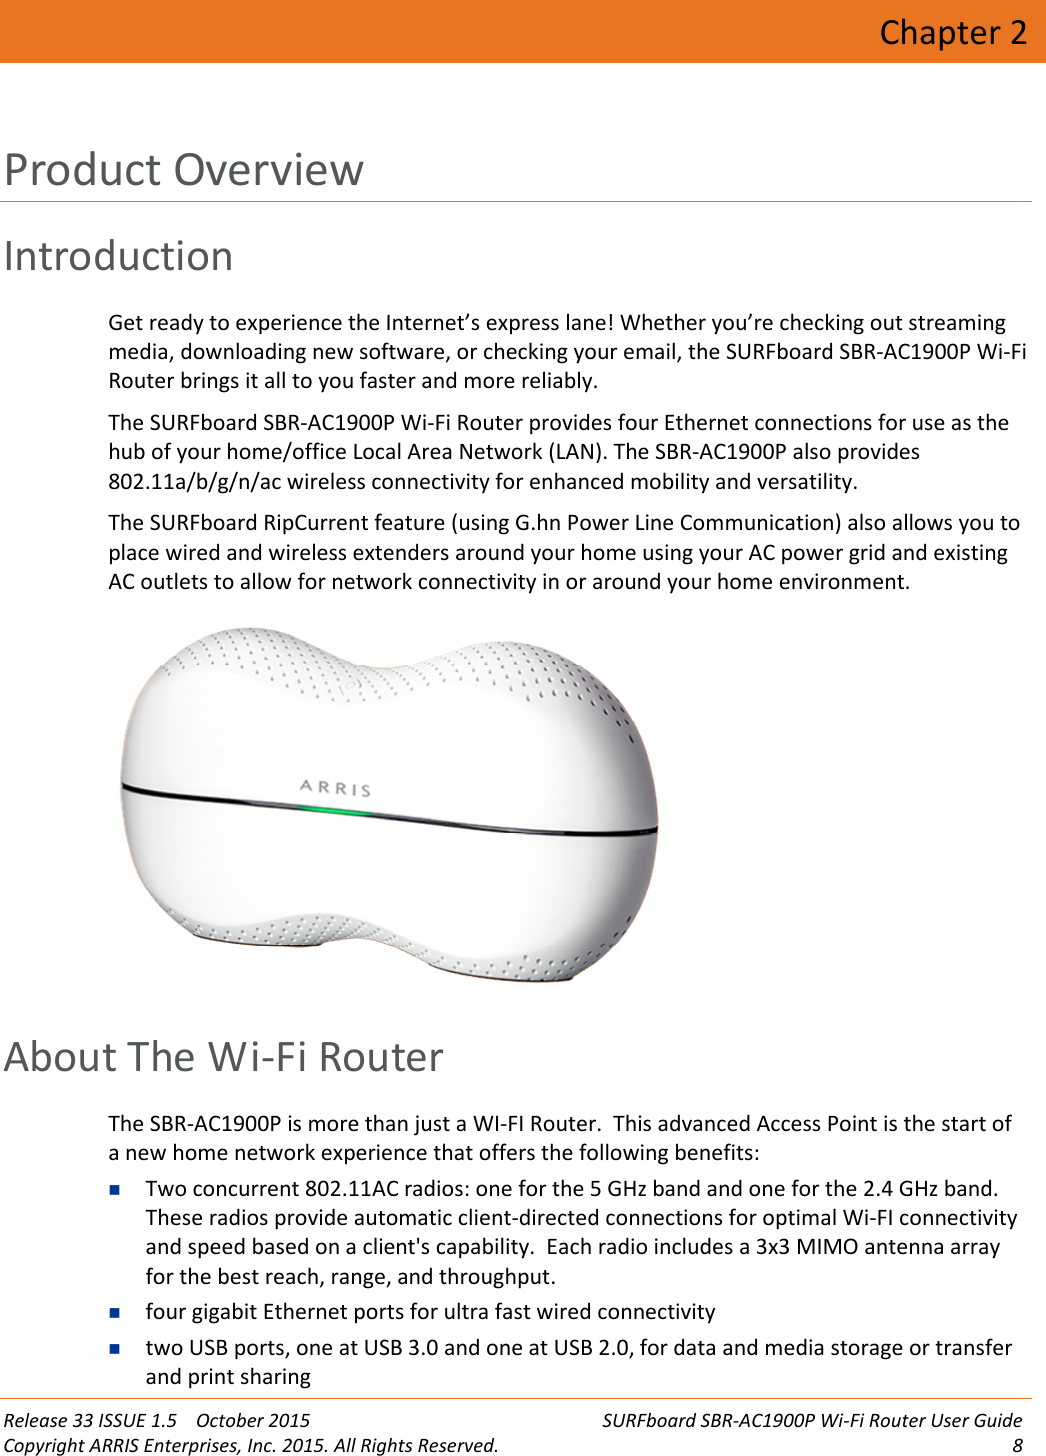 Release 33 ISSUE 1.5 October 2015 SURFboard SBR-AC1900P Wi-Fi Router User GuideCopyright ARRIS Enterprises, Inc. 2015. All Rights Reserved. 8Chapter 2Product OverviewIntroductionGet ready to experience the Internet’s express lane! Whether you’re checking out streamingmedia, downloading new software, or checking your email, the SURFboard SBR-AC1900P Wi-FiRouter brings it all to you faster and more reliably.The SURFboard SBR-AC1900P Wi-Fi Router provides four Ethernet connections for use as thehub of your home/office Local Area Network (LAN). The SBR-AC1900P also provides802.11a/b/g/n/ac wireless connectivity for enhanced mobility and versatility.The SURFboard RipCurrent feature (using G.hn Power Line Communication) also allows you toplace wired and wireless extenders around your home using your AC power grid and existingAC outlets to allow for network connectivity in or around your home environment.About The Wi-Fi RouterThe SBR-AC1900P is more than just a WI-FI Router. This advanced Access Point is the start ofa new home network experience that offers the following benefits:Two concurrent 802.11AC radios: one for the 5 GHz band and one for the 2.4 GHz band.These radios provide automatic client-directed connections for optimal Wi-FI connectivityand speed based on a client&apos;s capability. Each radio includes a 3x3 MIMO antenna arrayfor the best reach, range, and throughput.four gigabit Ethernet ports for ultra fast wired connectivitytwo USB ports, one at USB 3.0 and one at USB 2.0, for data and media storage or transferand print sharing